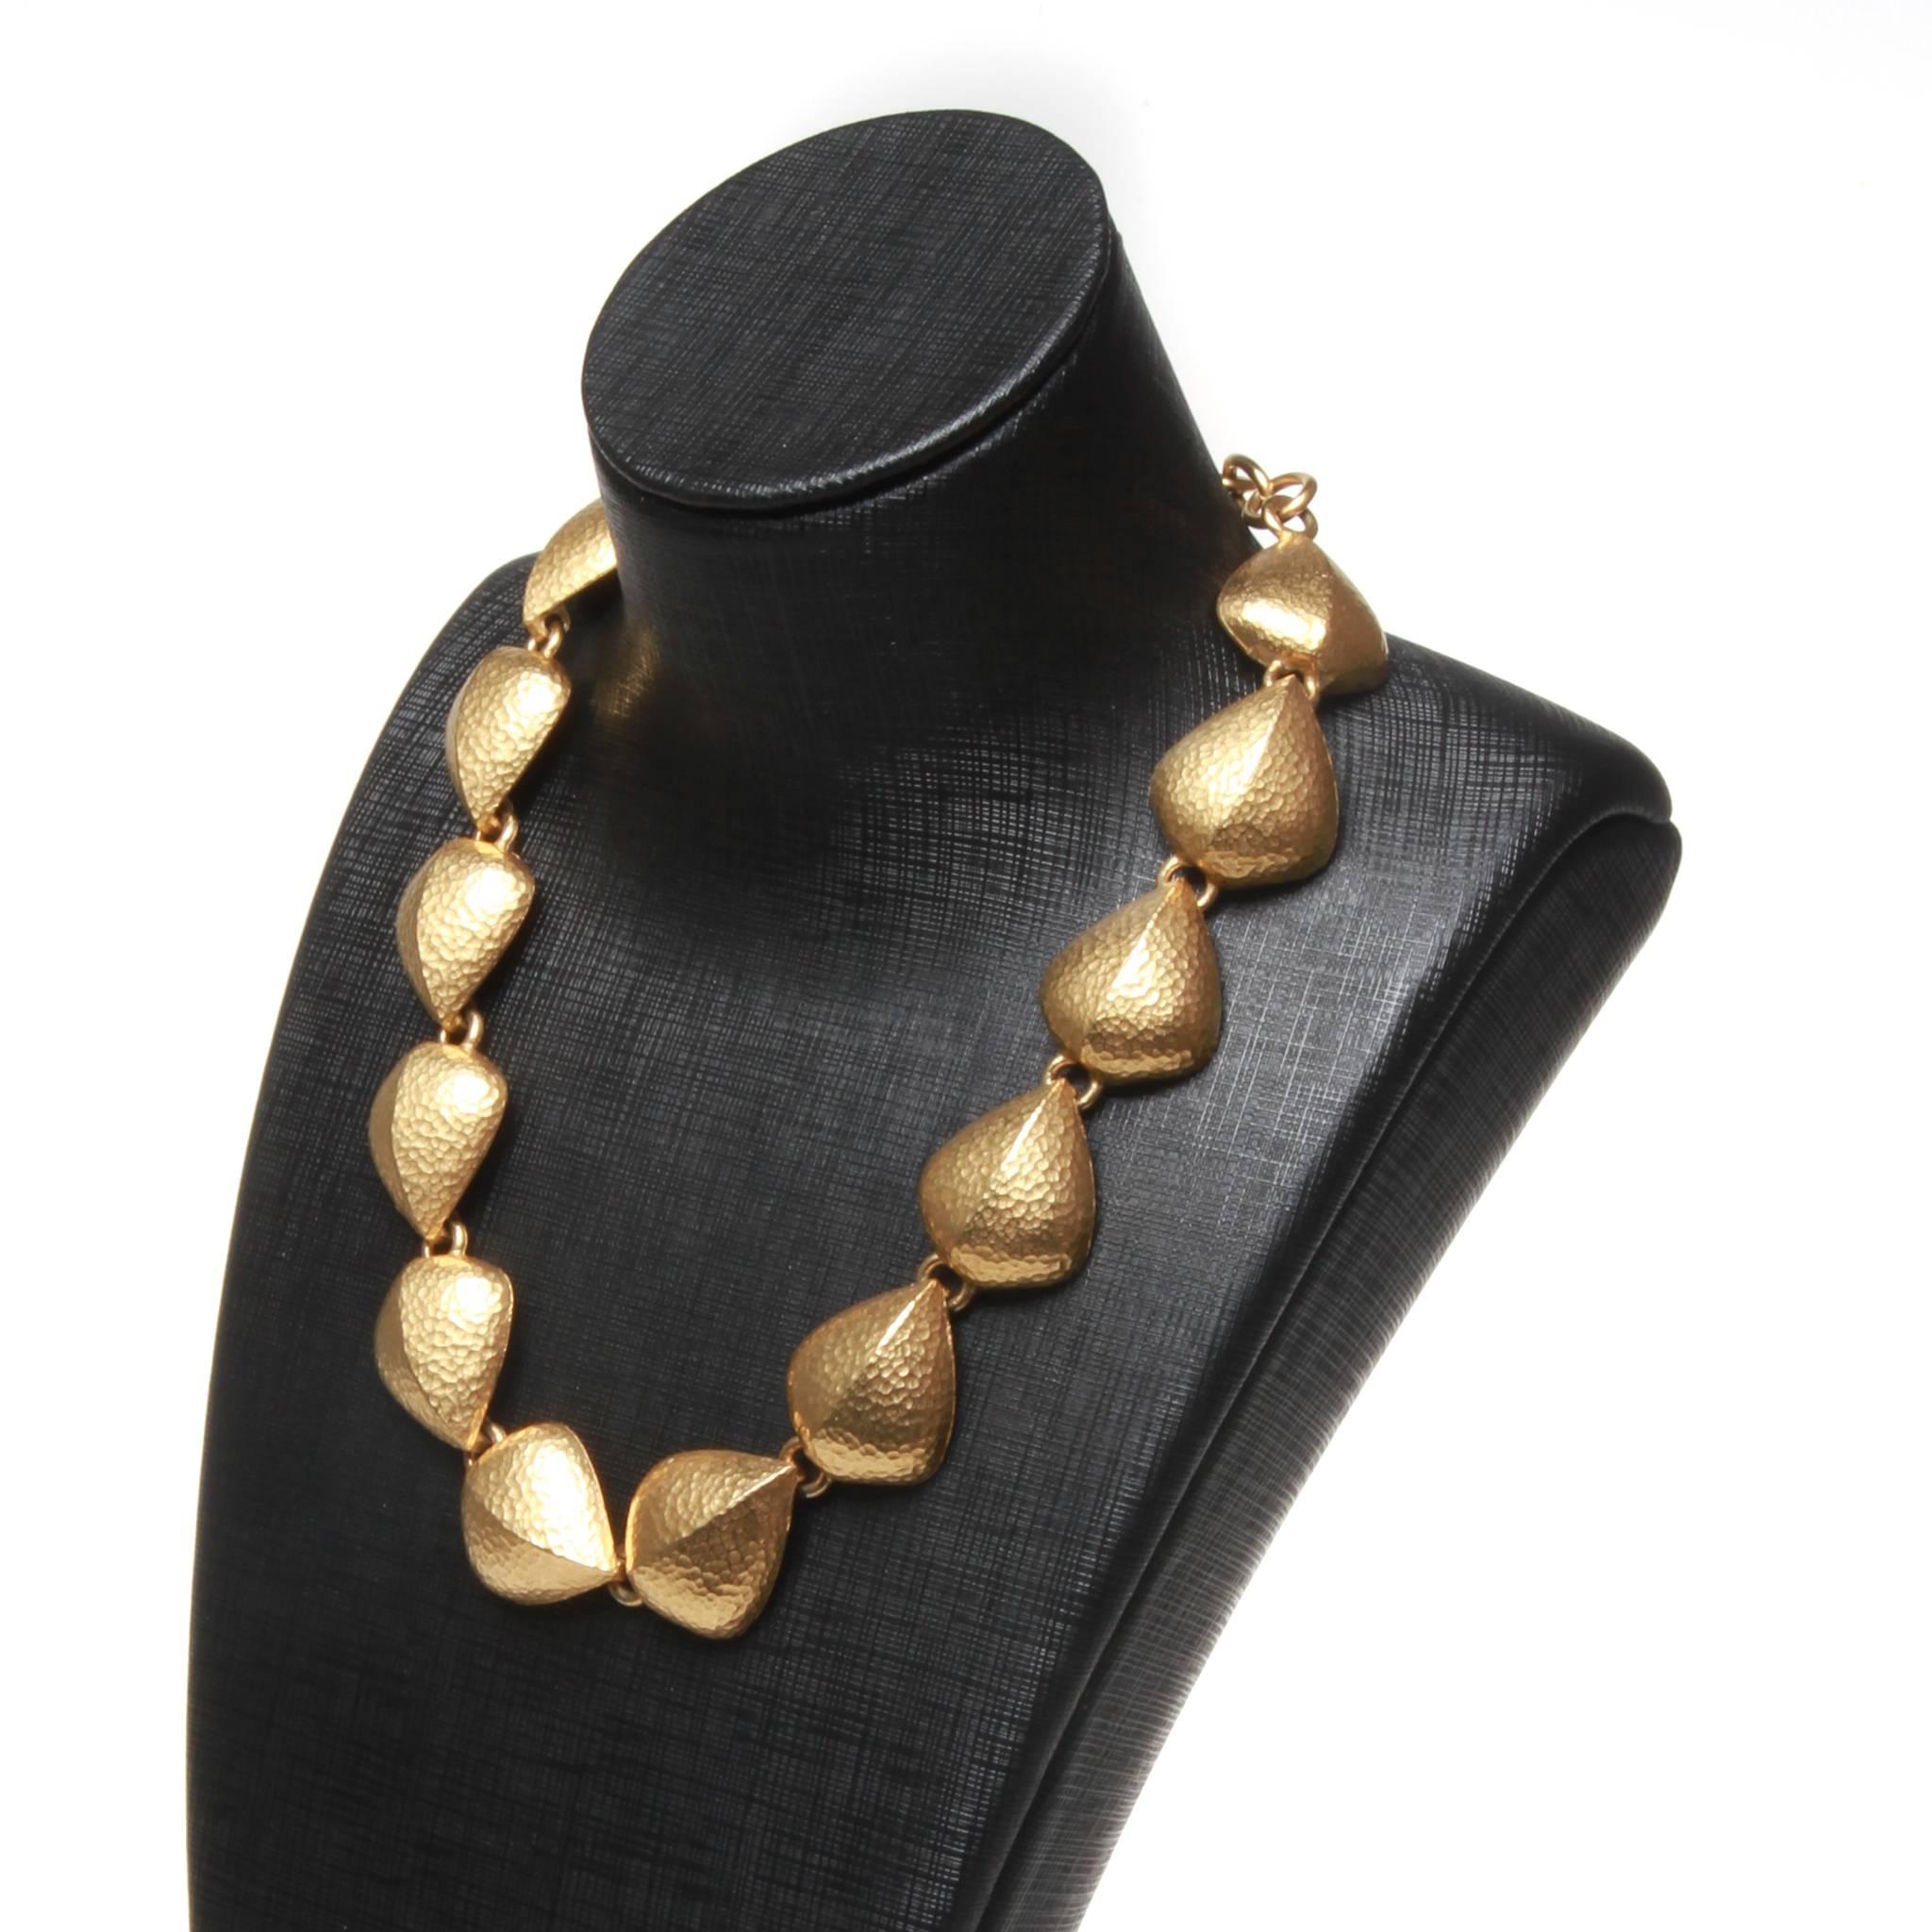 Vintage Givenchy necklace featuring a string of matte gold-tone, hammered metal links with hook closure at the back. Length of chain at back for adjustability. 

40-52cm adjustability